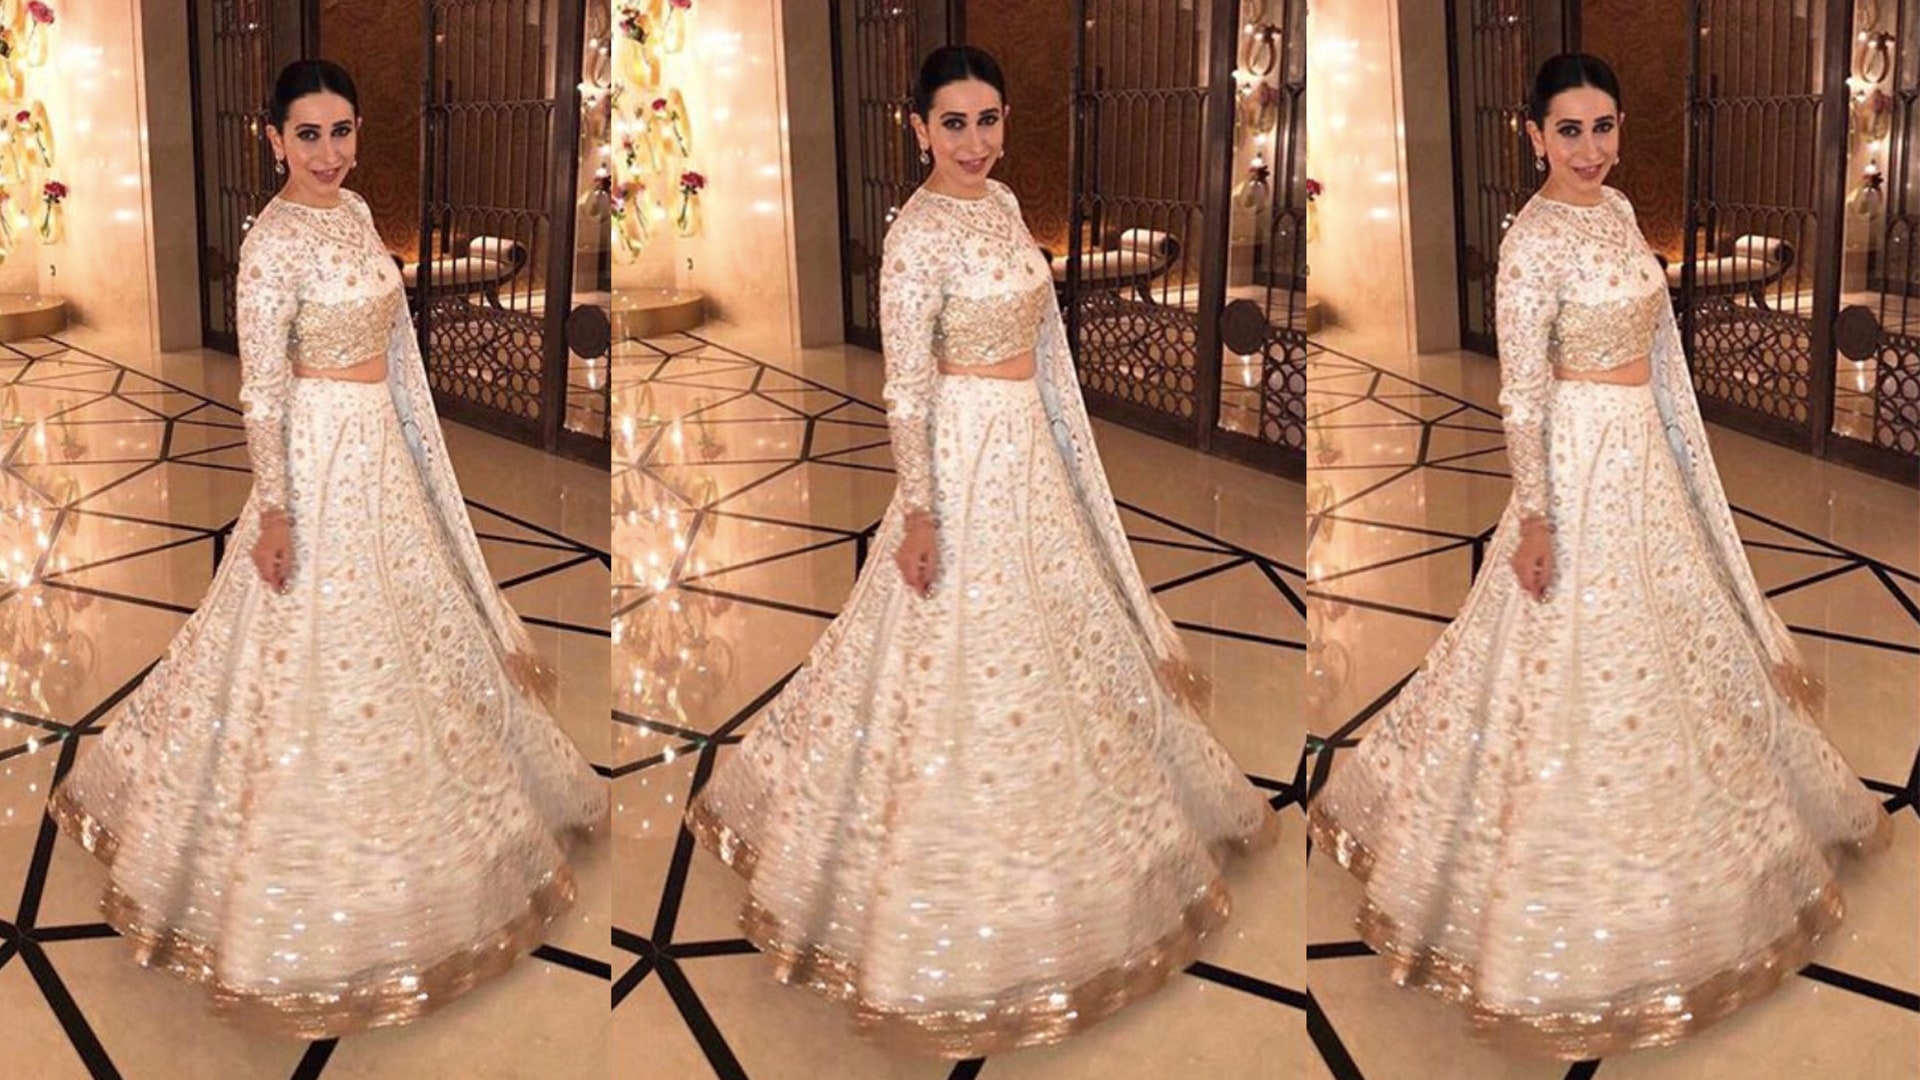 You are currently viewing Karishma Kapoor for Mohit Marwah Wedding